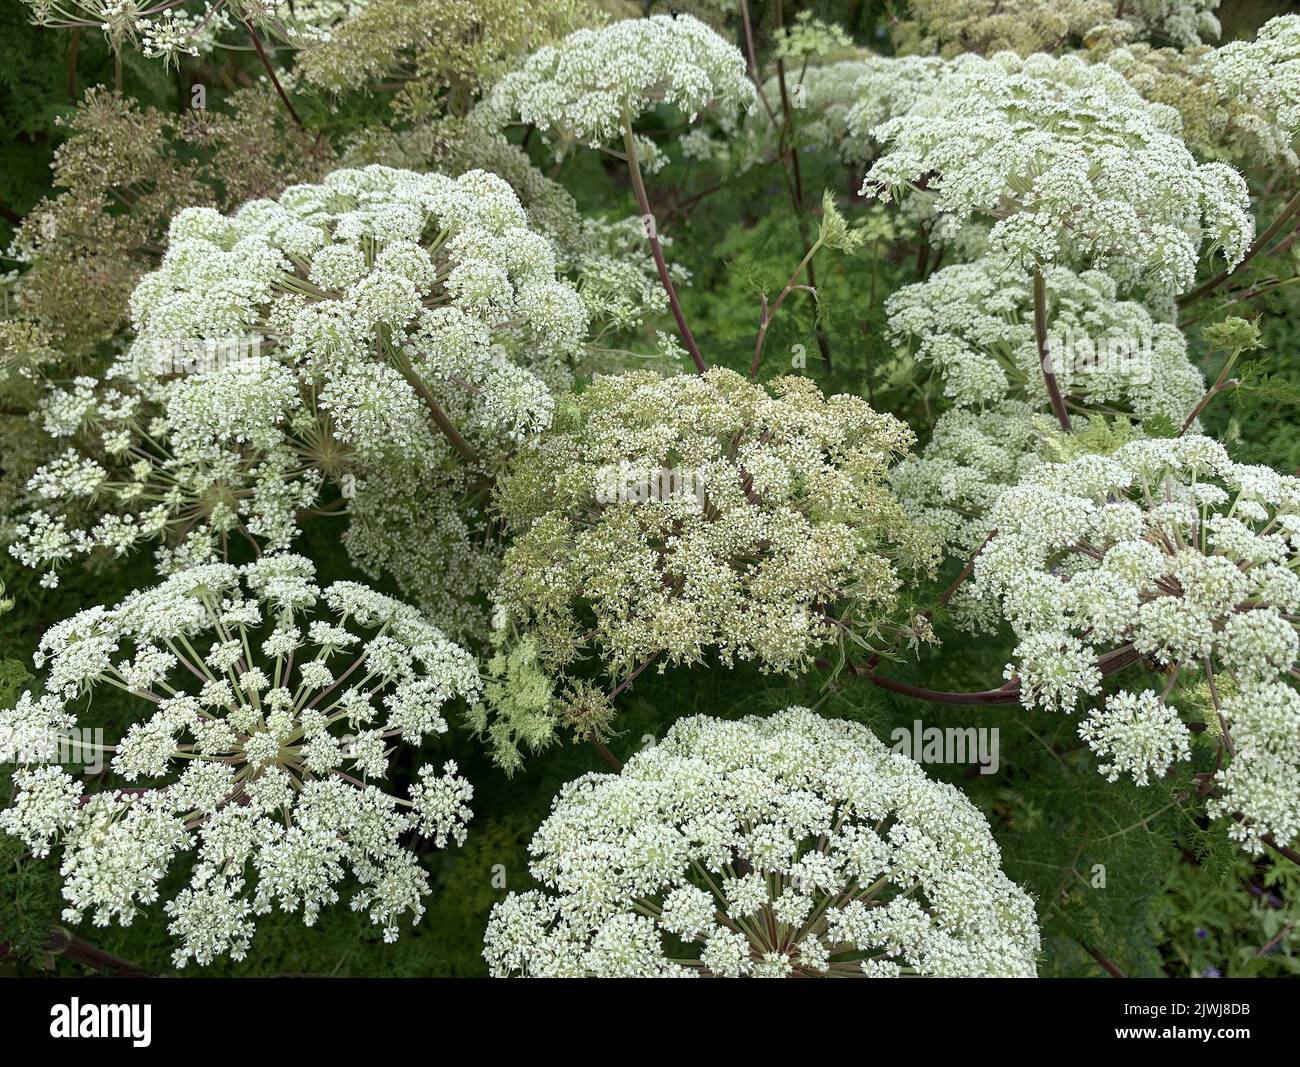 Close up of flowers of the herbaceous perennial plant Selinum wallichianum or Wallich milk parsley seen in the garden in the UK in late summer. Stock Photo